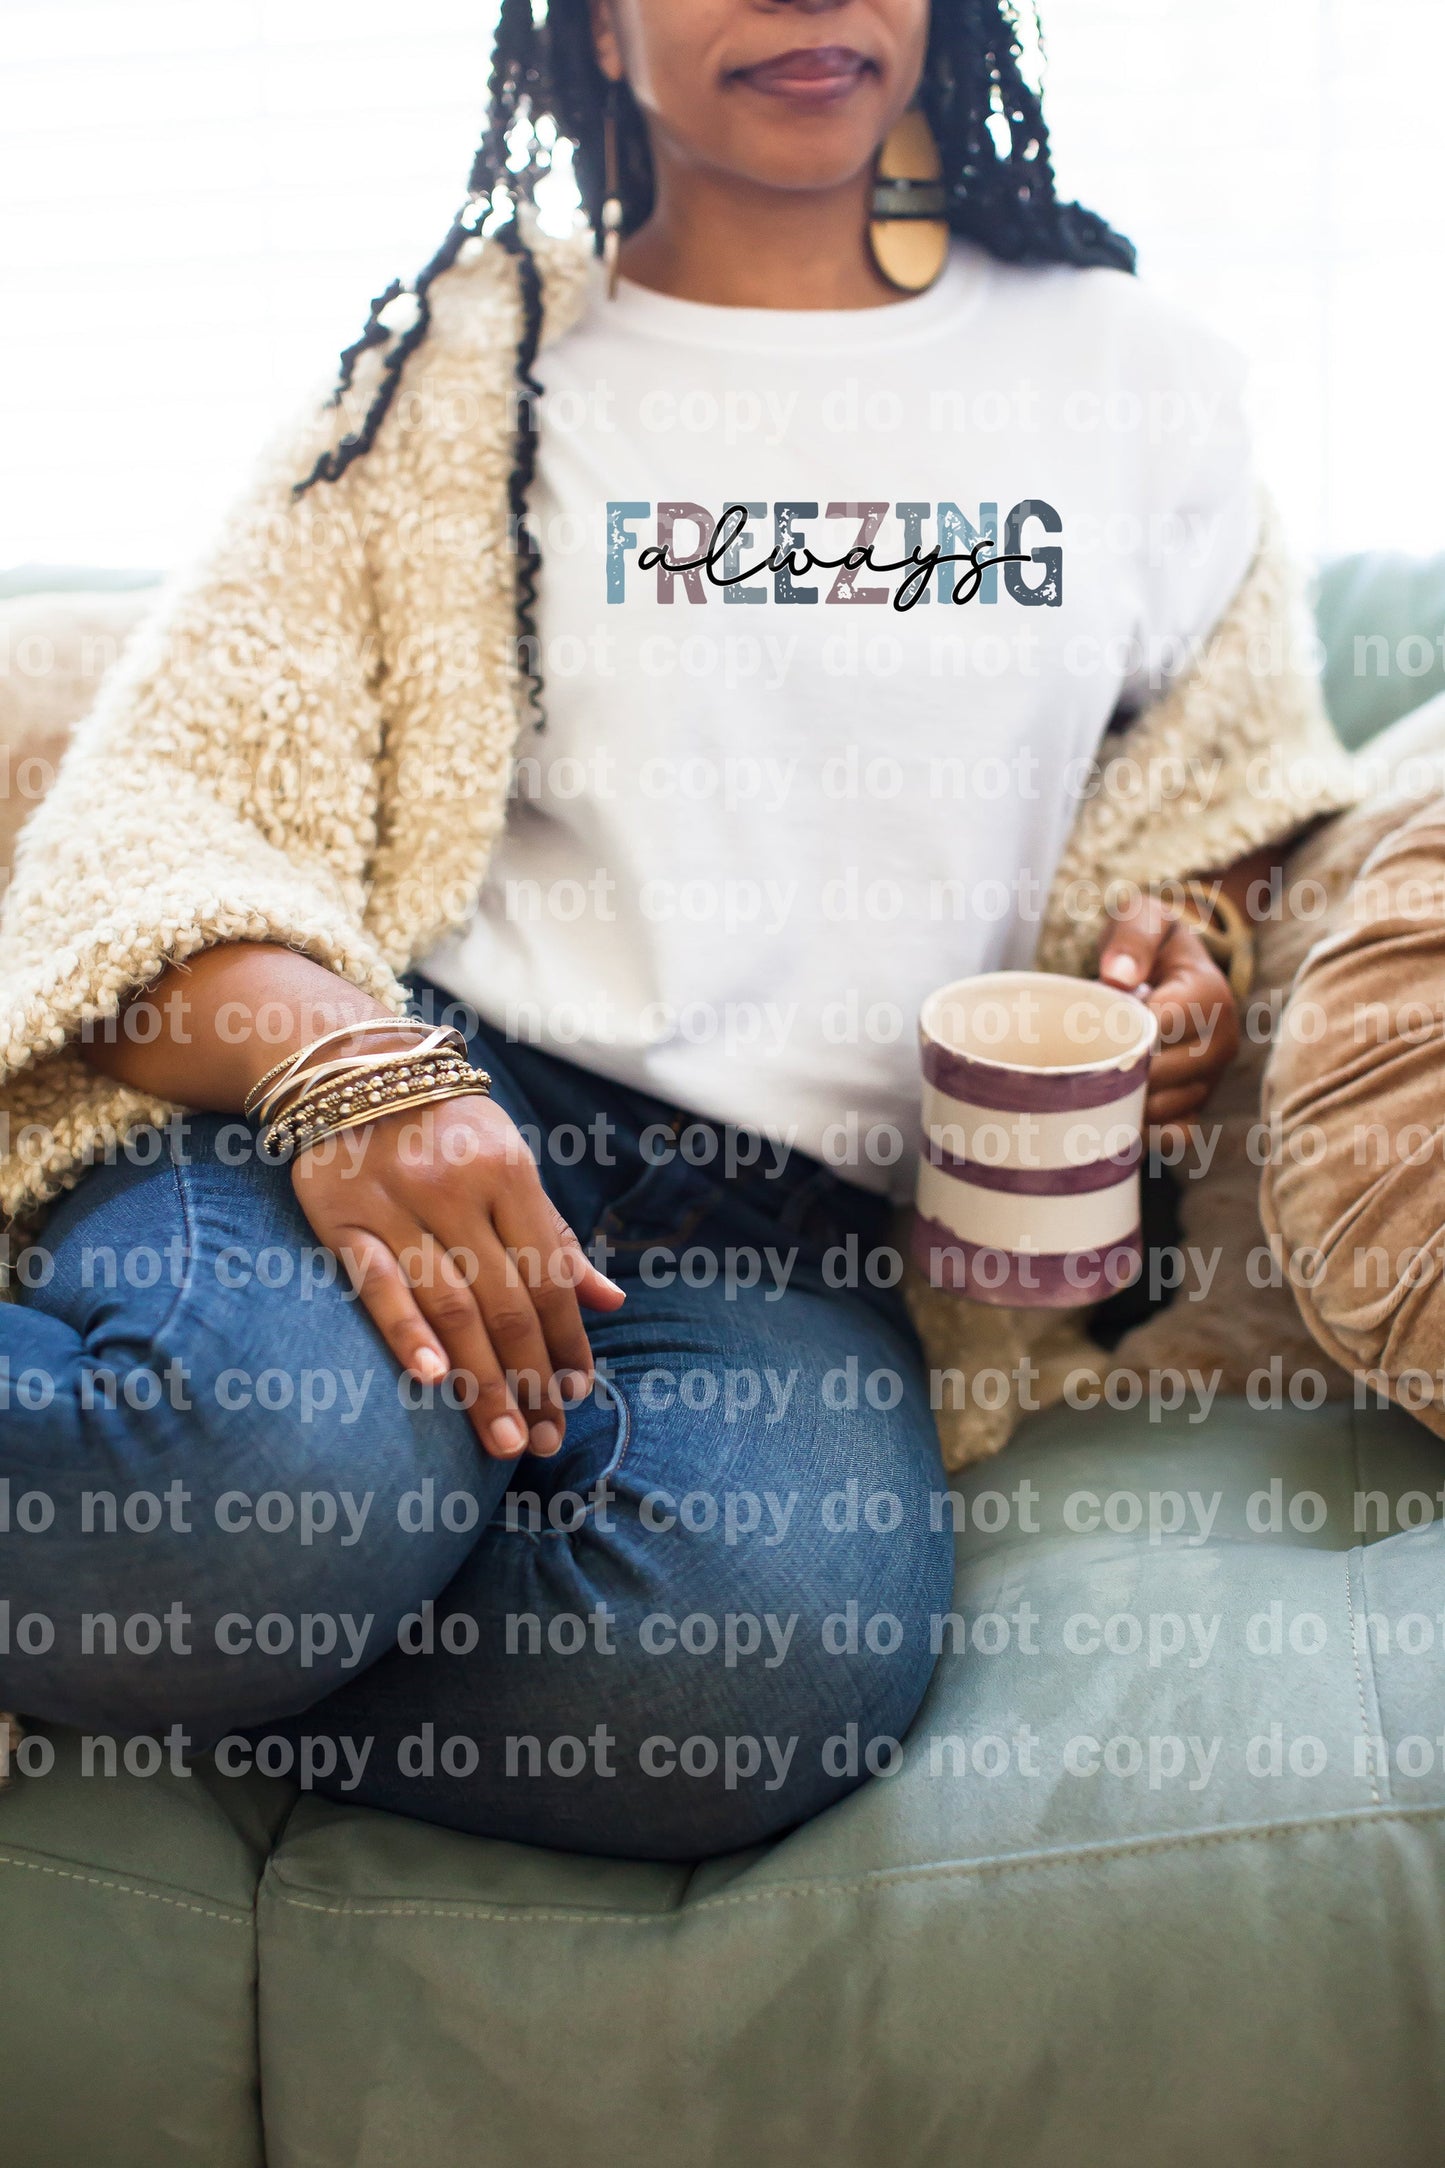 Always Freezing Full Color/One Color Dream Print or Sublimation Print